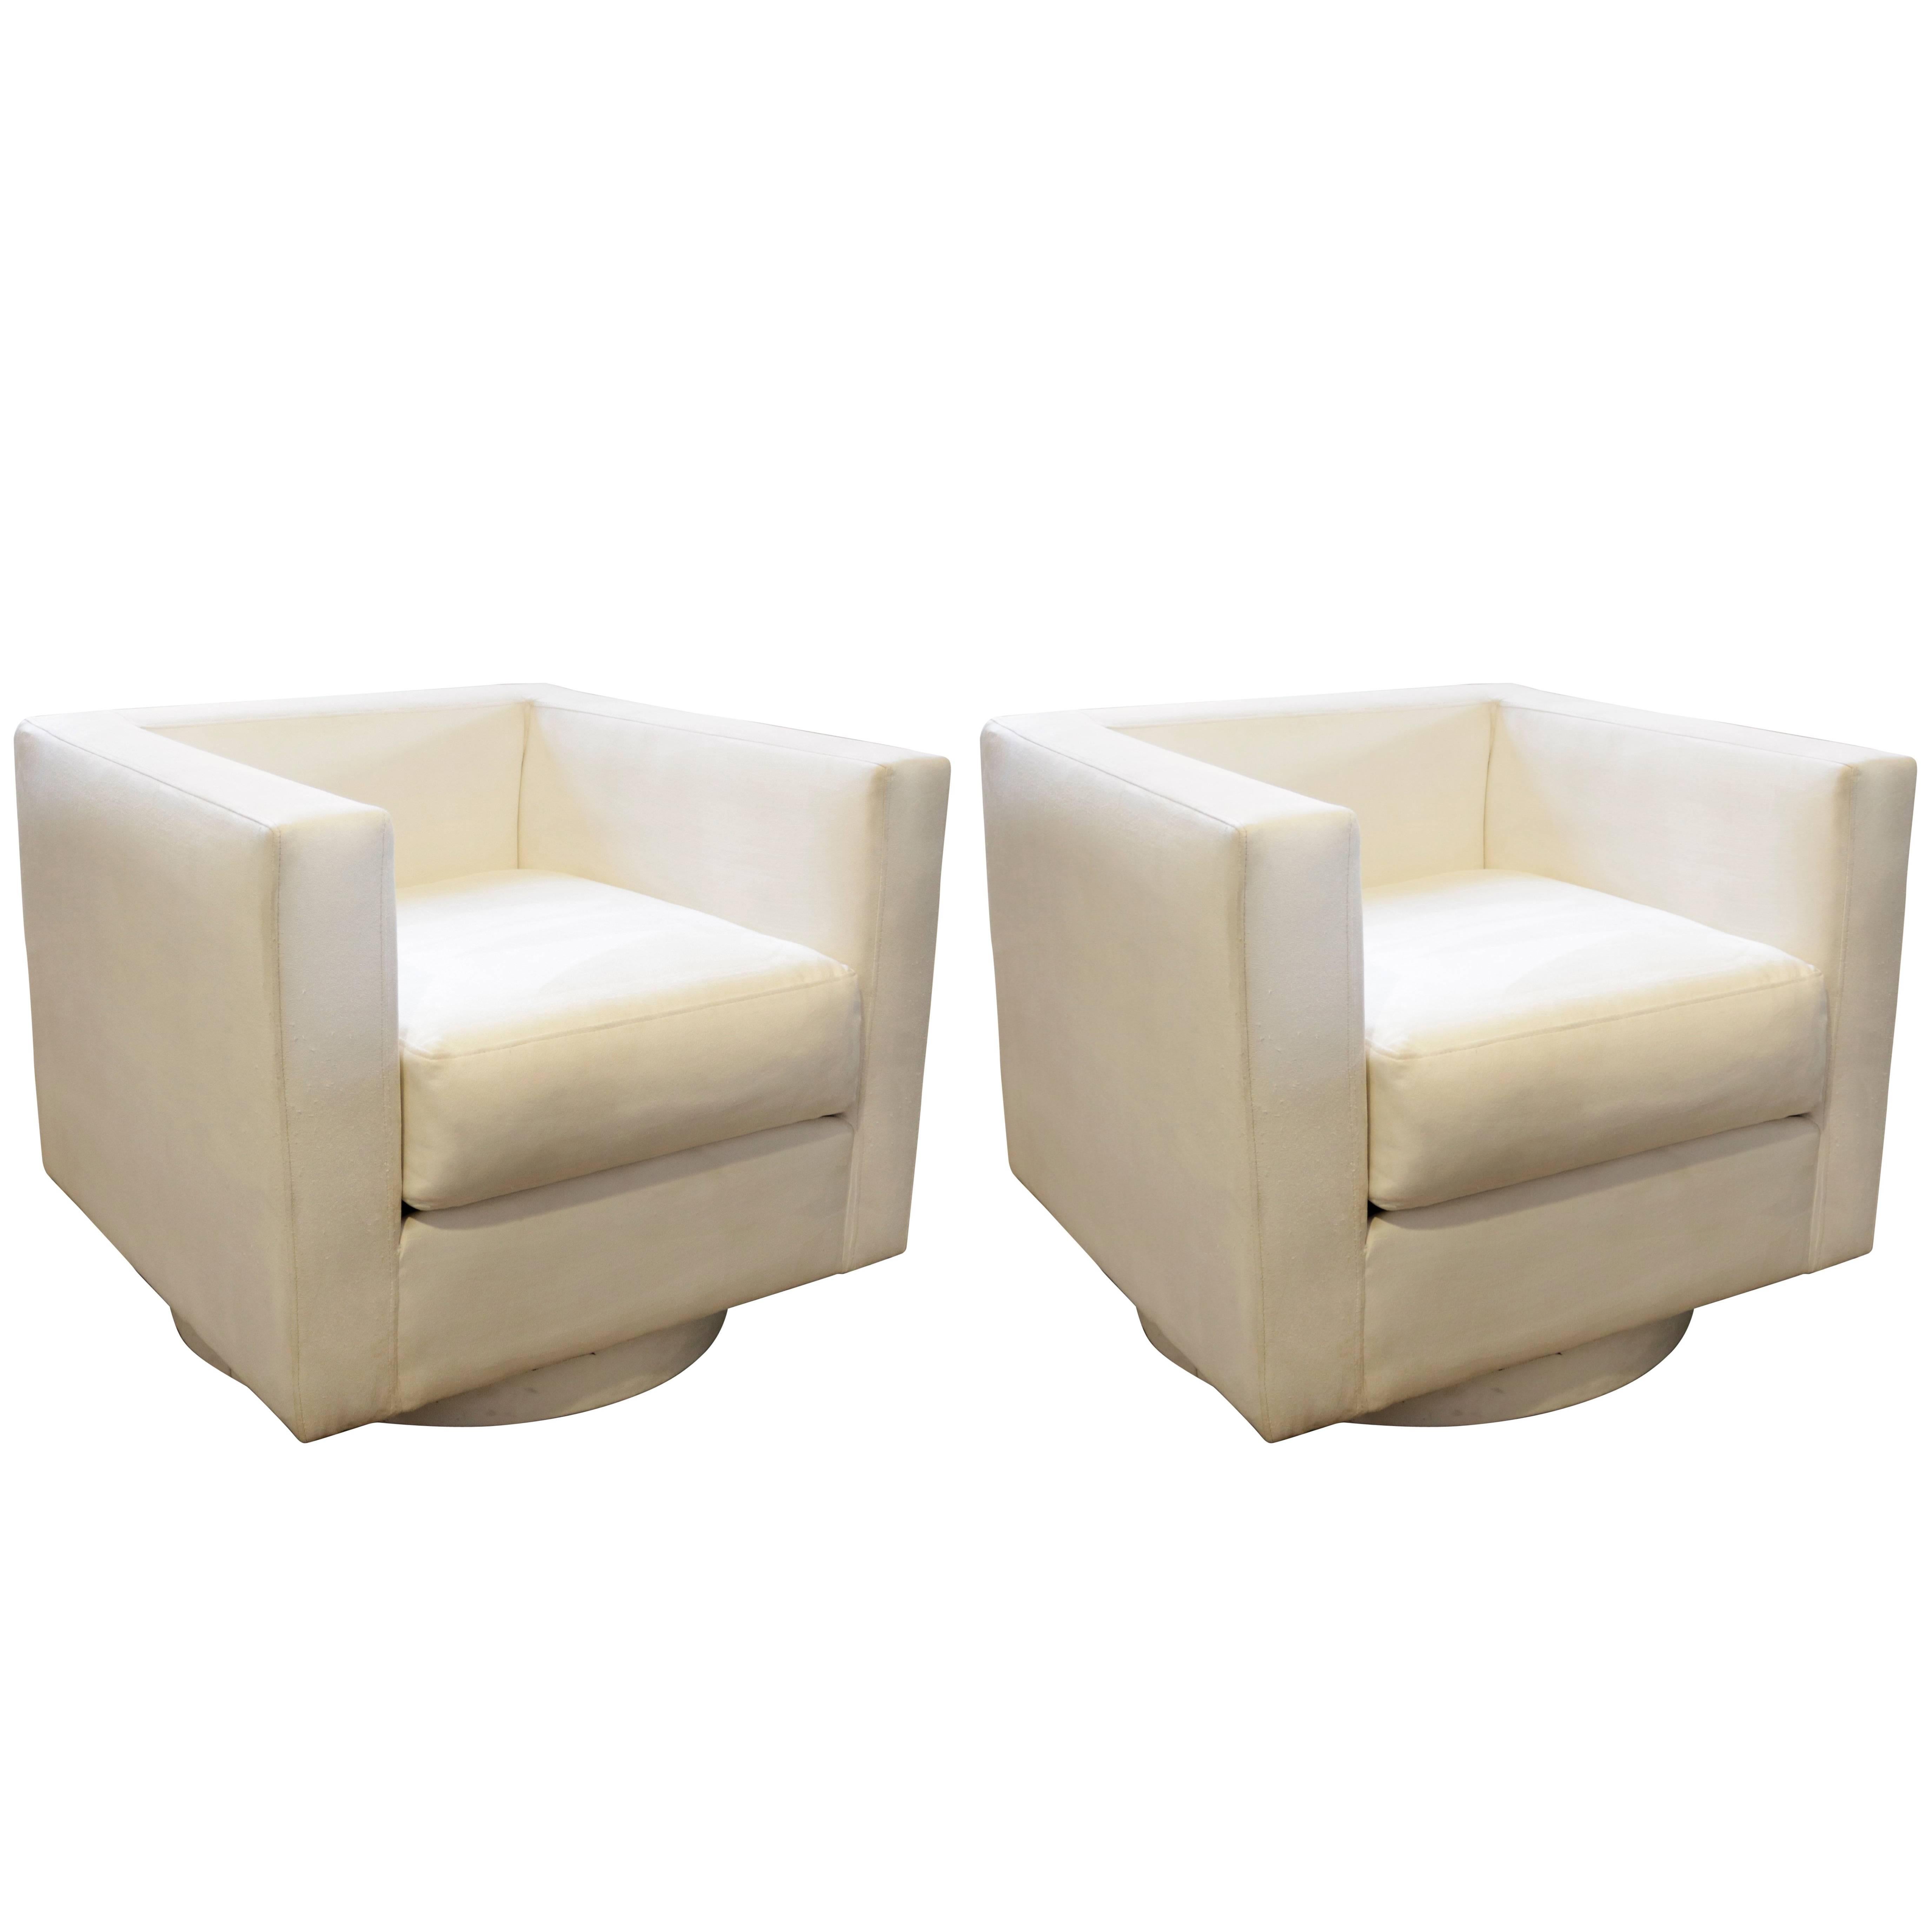 Set of Two White Upholstered Tuxedo Swivel Chairs by Harvey Probber